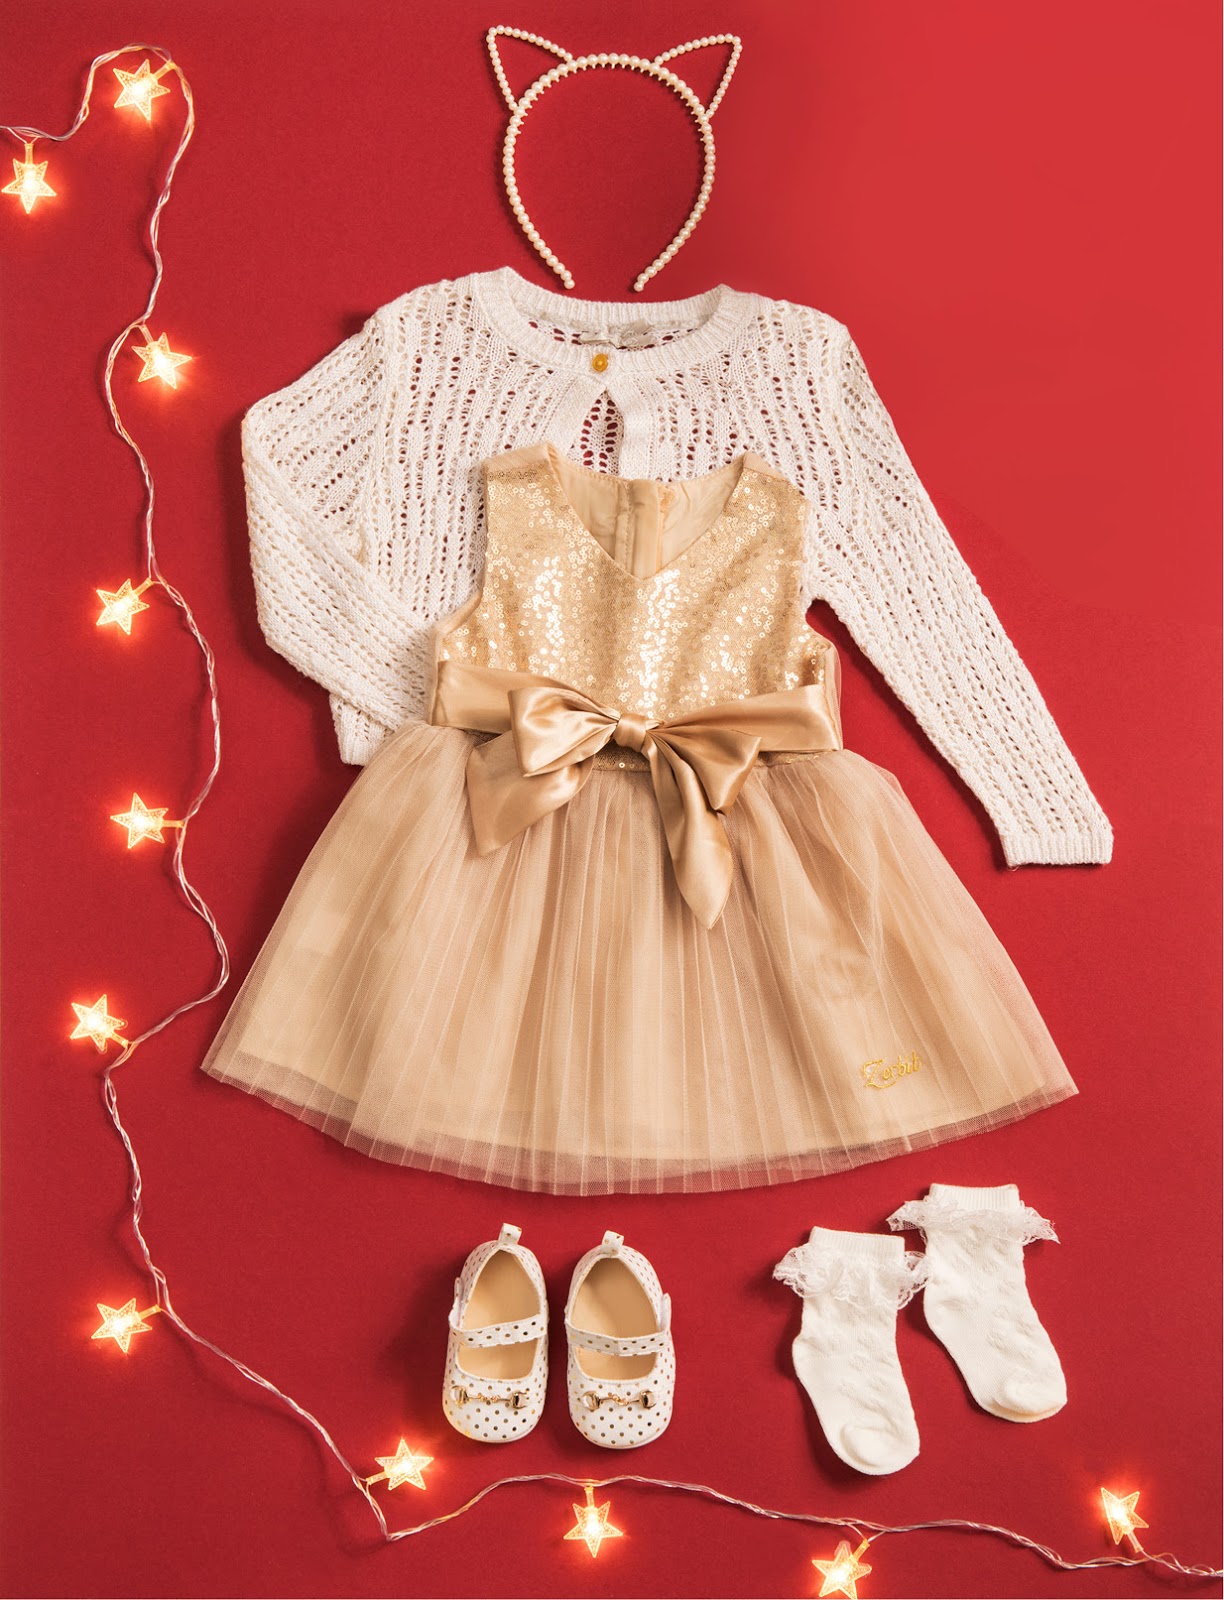 Kids’ holiday outfits for festive occasions | Edgars Mag